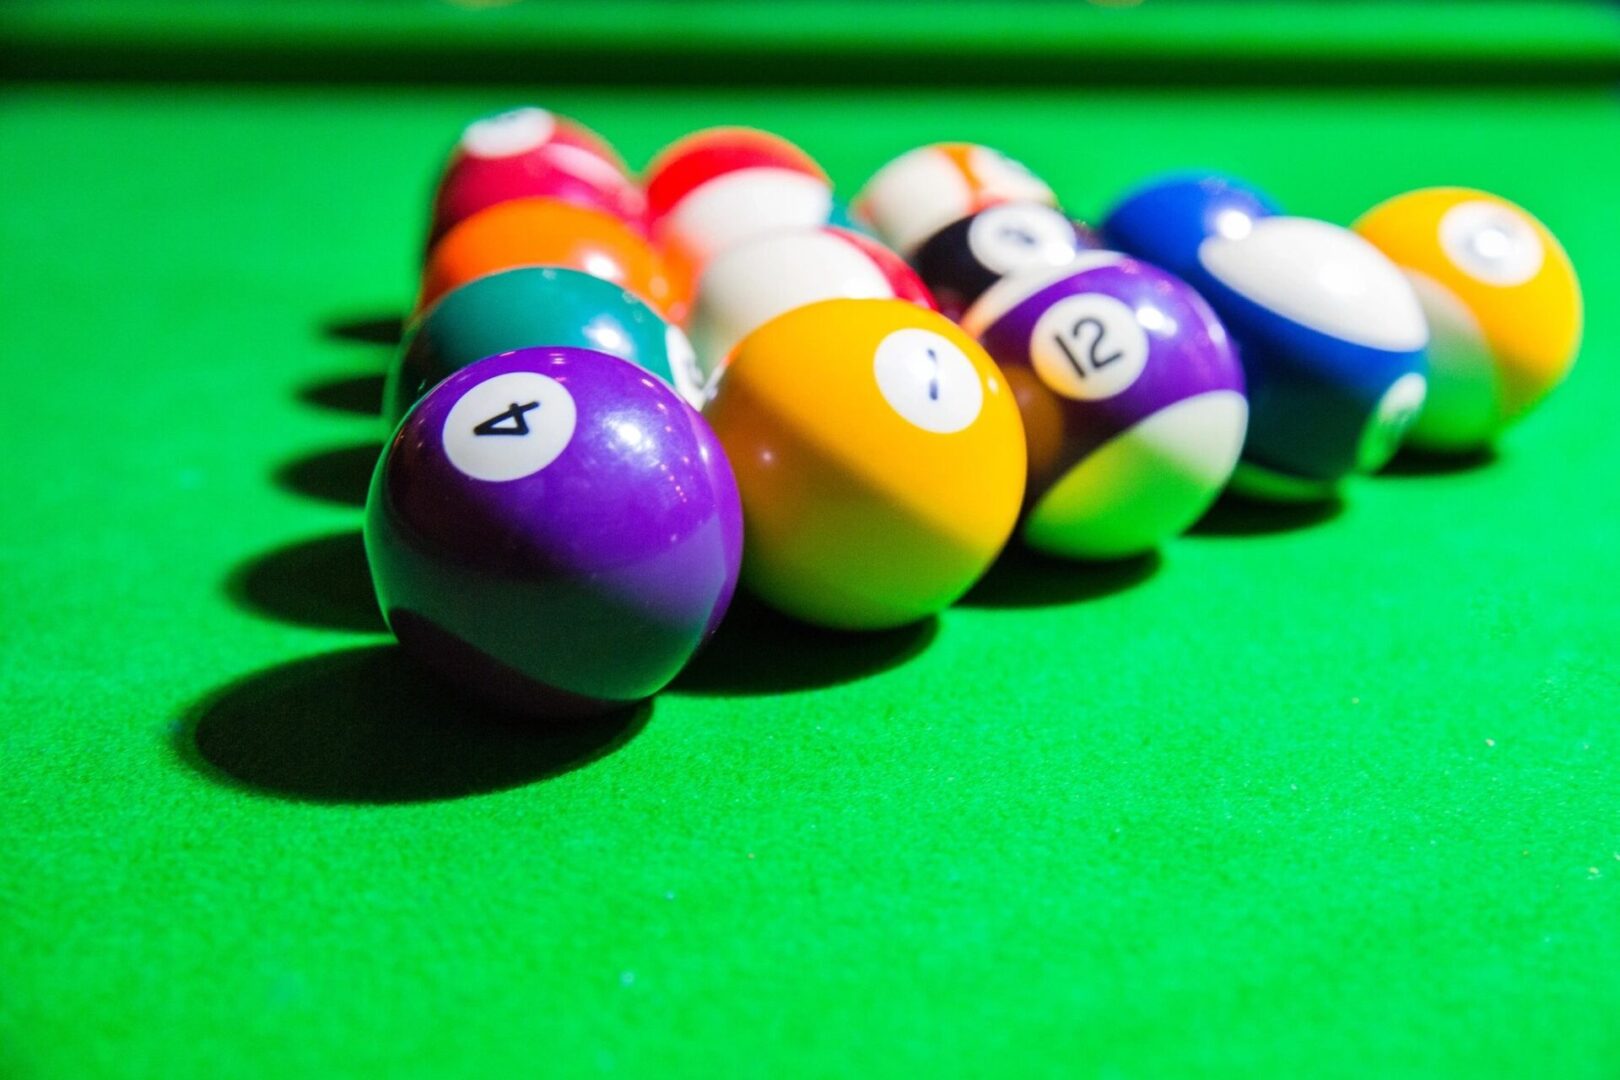 A group of billiard balls on a green table.